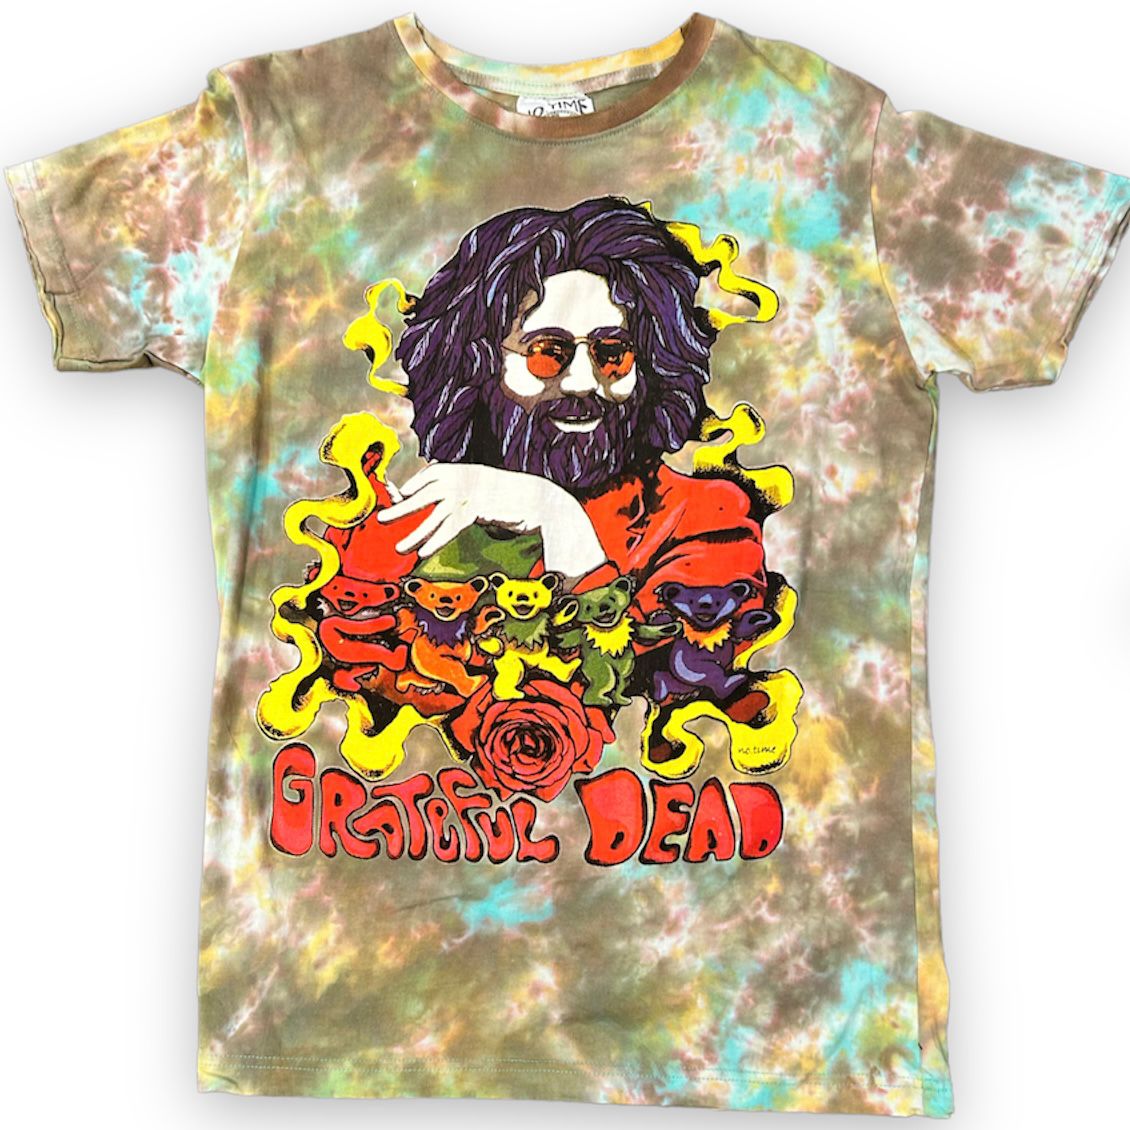 Dead Head T-Shirt by No Time